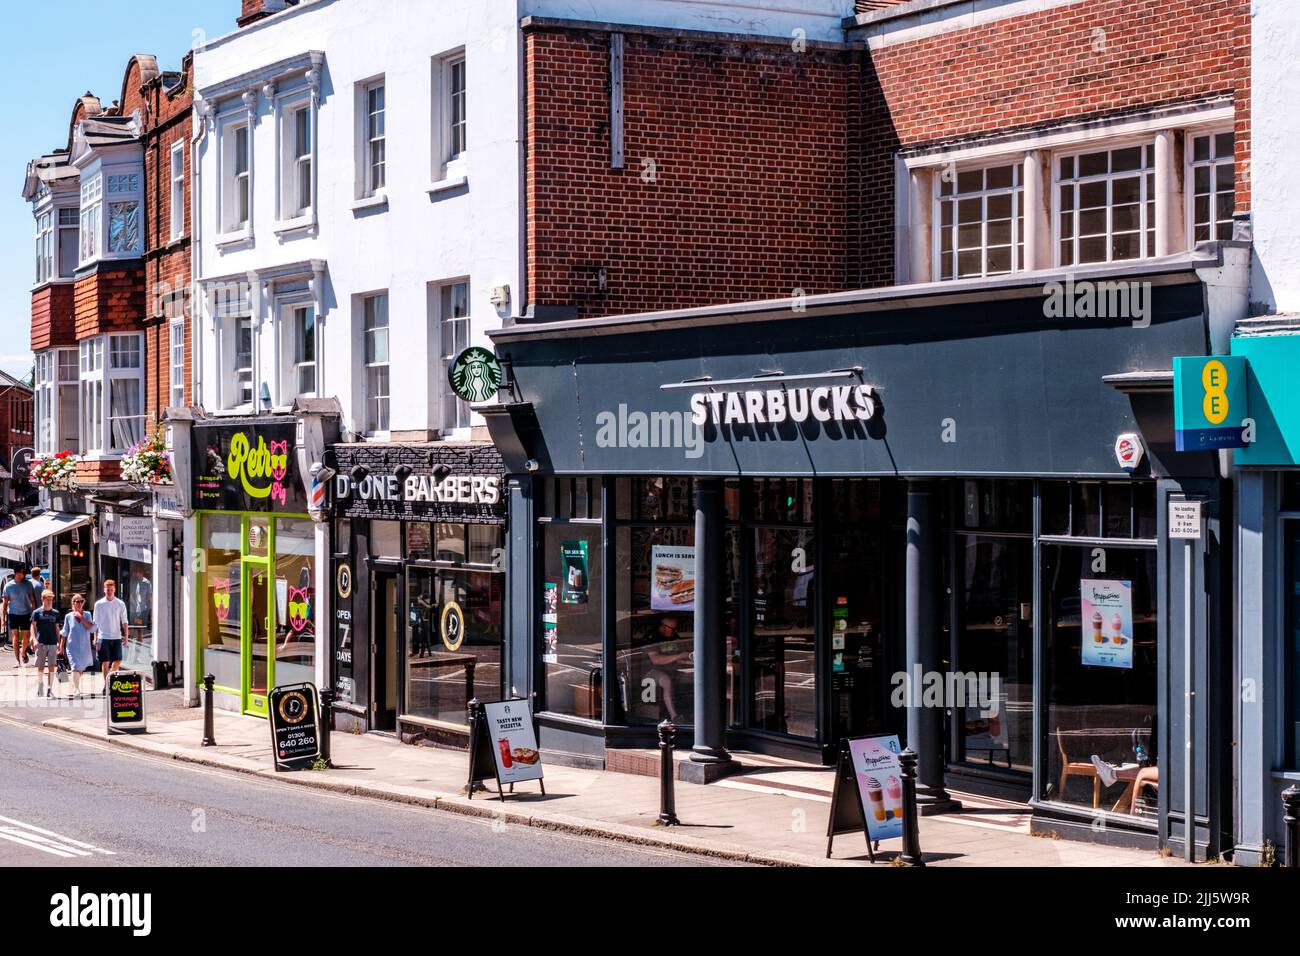 Dorking Surrey Hills UK, July 14 2022, Dorking High Street Row Or Line Of Traditional Retail Shops Or Stores Stock Photo